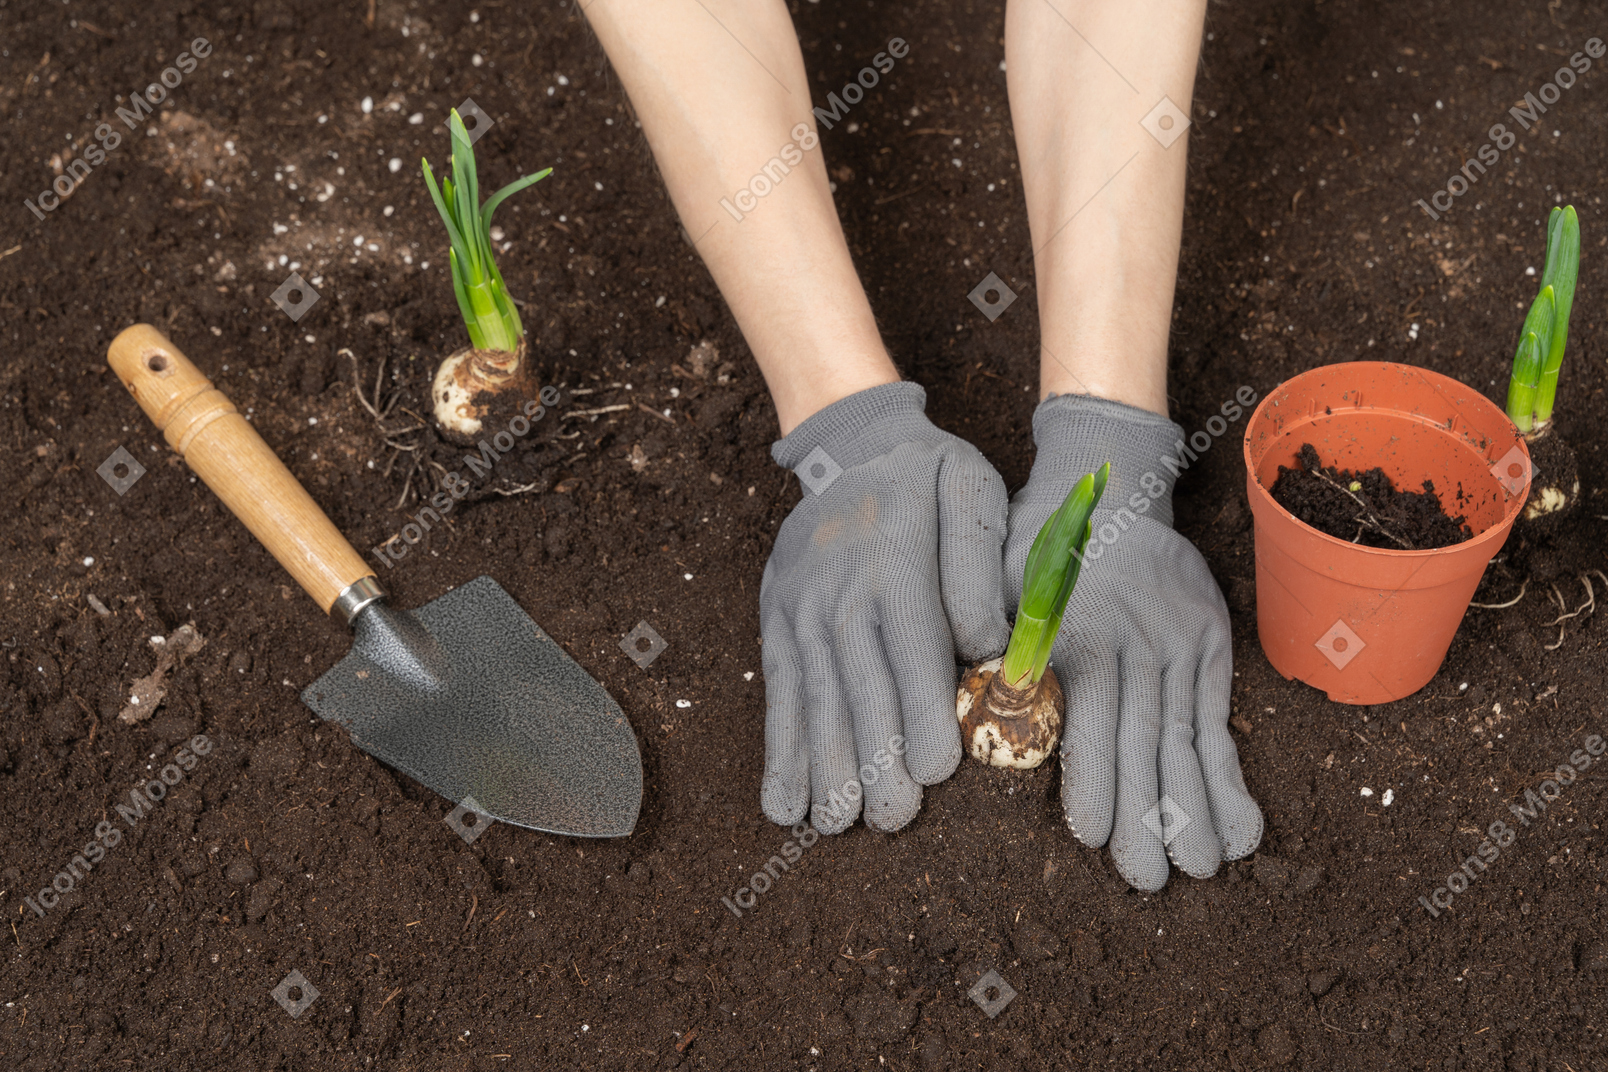 Human hands in gloves putting a plant into soil